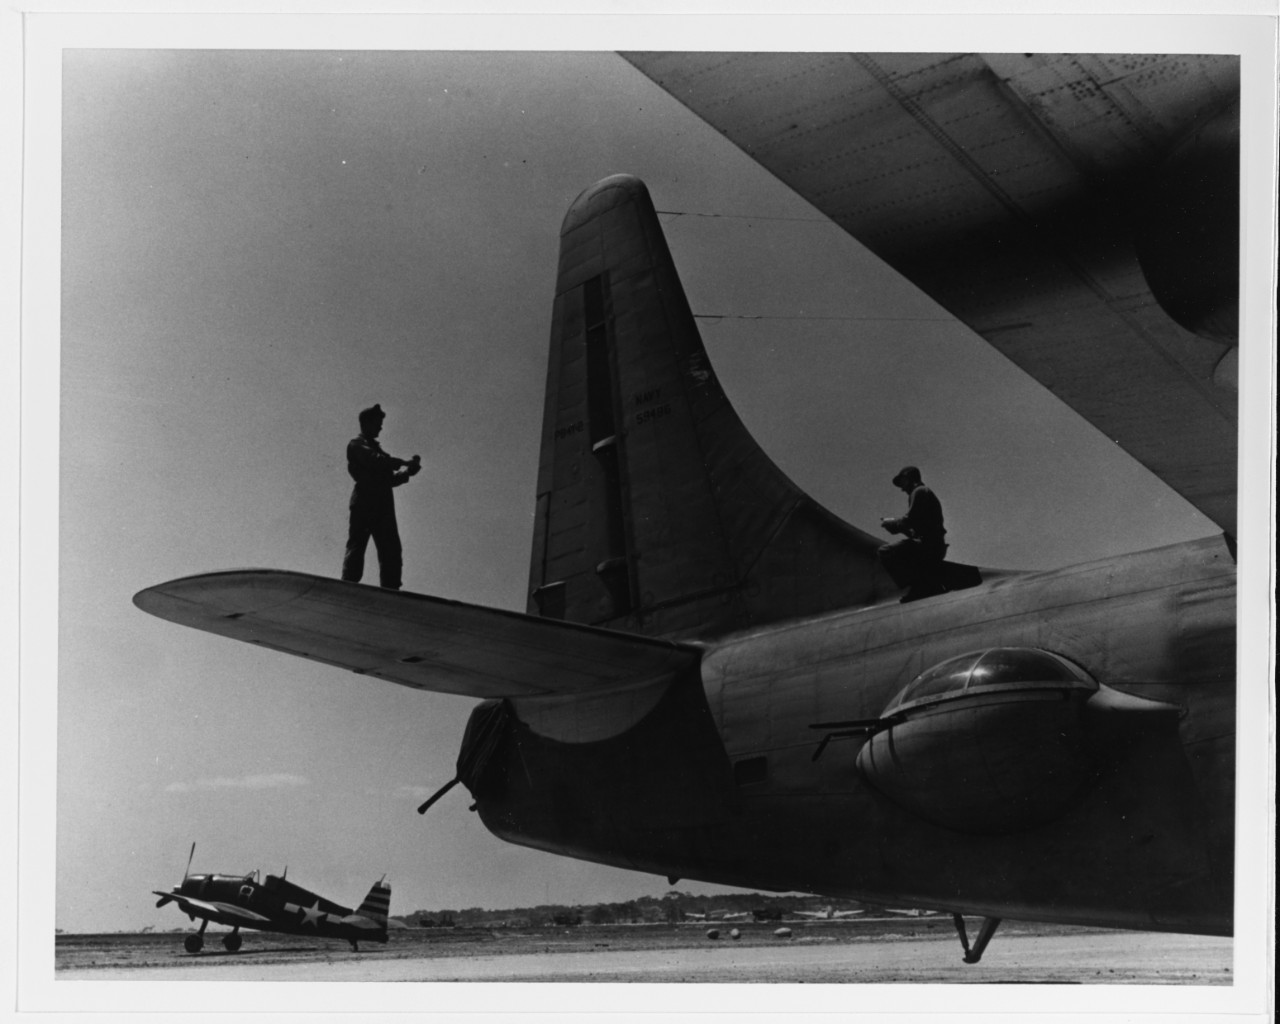 Consolidated PB4Y-2 "Privateer" (BuNo 594866)